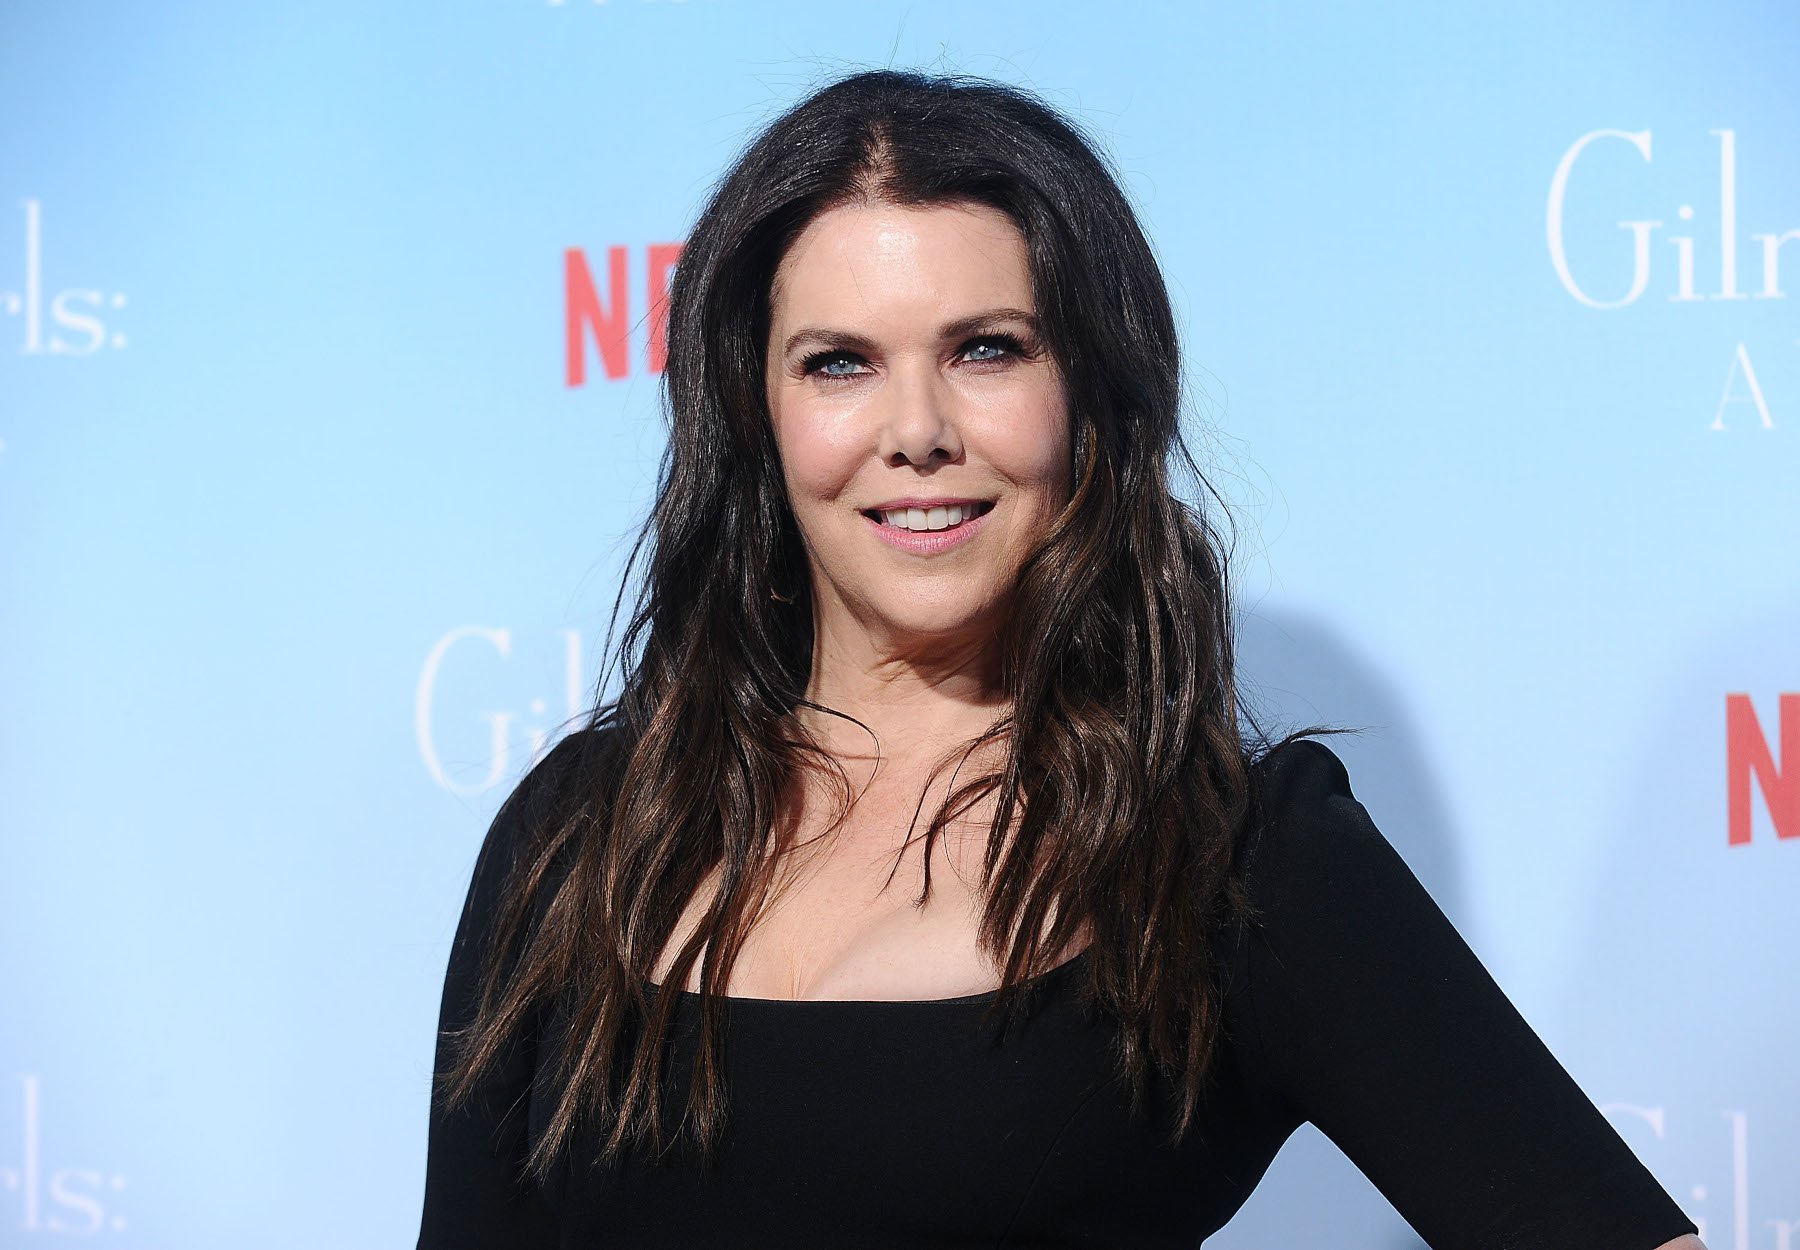 'Gilmore Girls' star Lauren Graham, who commented on an alternate title for the show. She's standing in front of a blue wall with the Netflix logo. Her shirt is black, and her hair is curled.